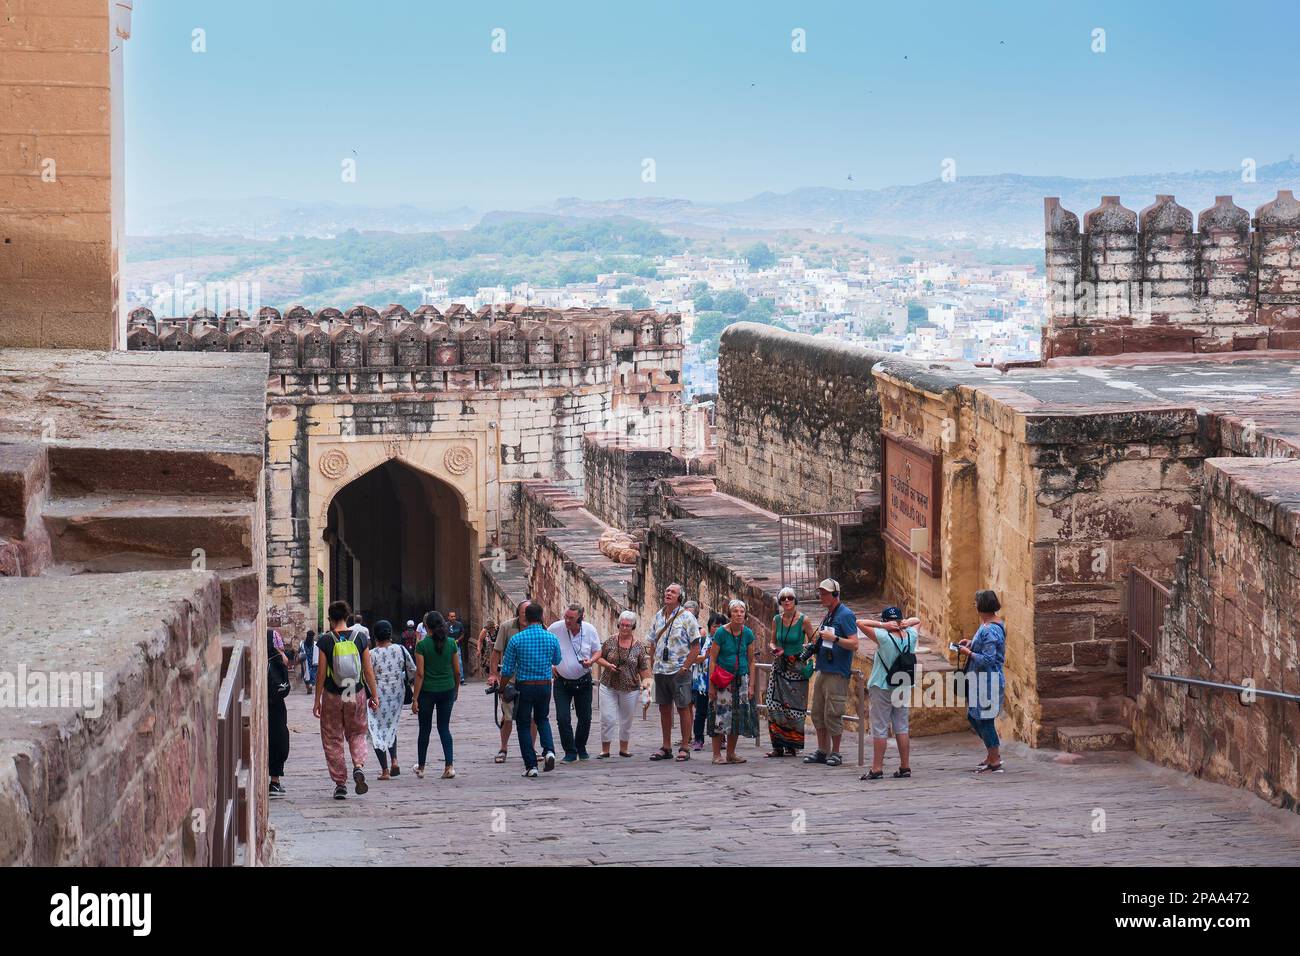 Jodhpur, Rajasthan, India - 19th October 2019 : Foreigner men and women tourists visiting famous Mehrangarh fort, Mehrangarh Fort is UNESCO site. Stock Photo